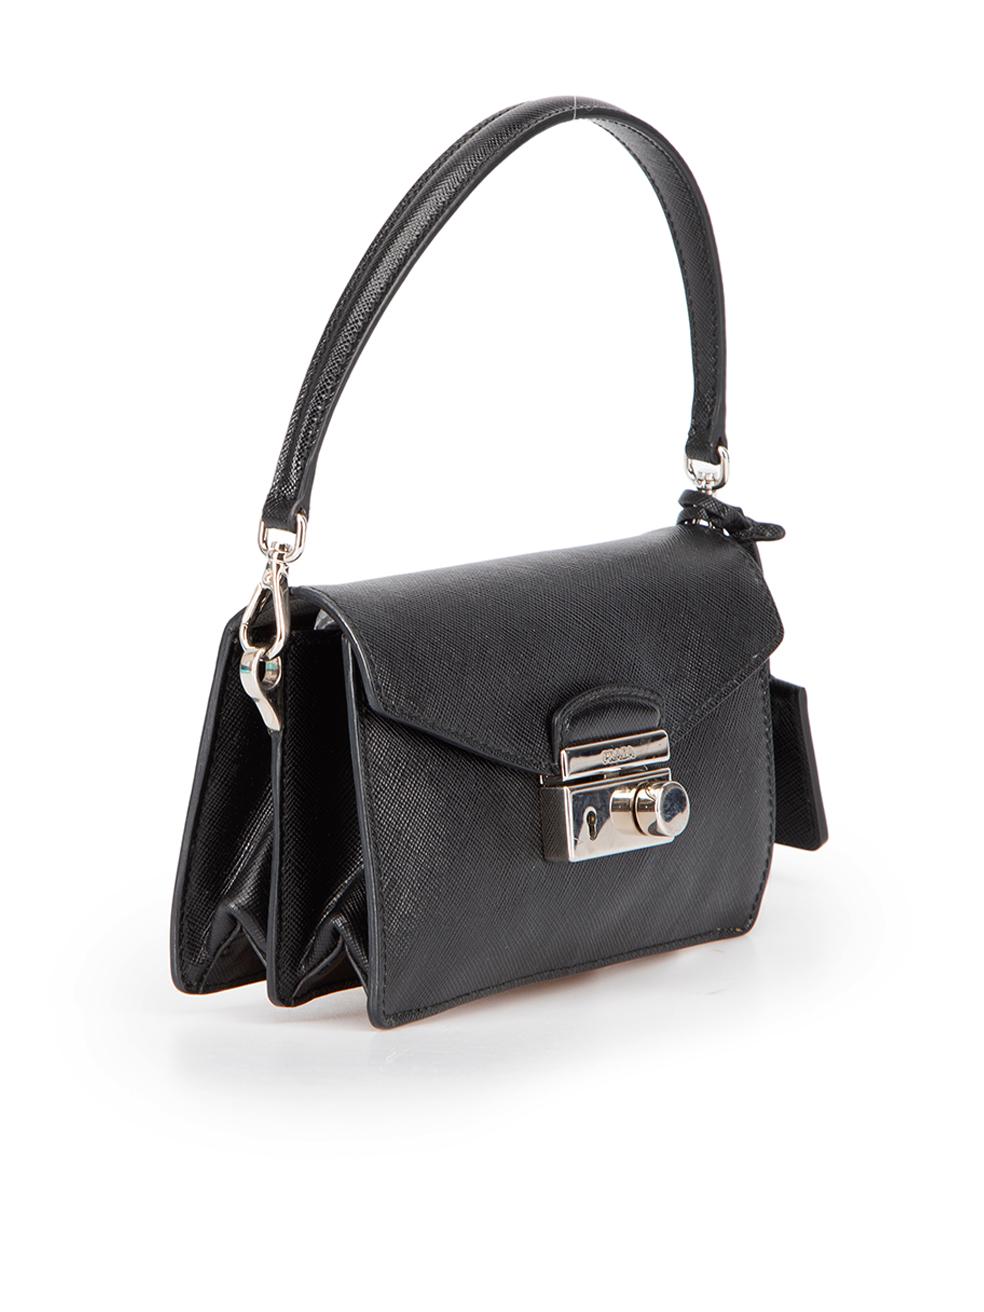 CONDITION is Good. Minor wear to bag is evident. Light wear to leather with very mild hardware tarnishing and discoloured mark found at lining on this used Prada designer resale item.

Details
Black
Scotchgrain saffiano leather
Mini crossbody bag
1x